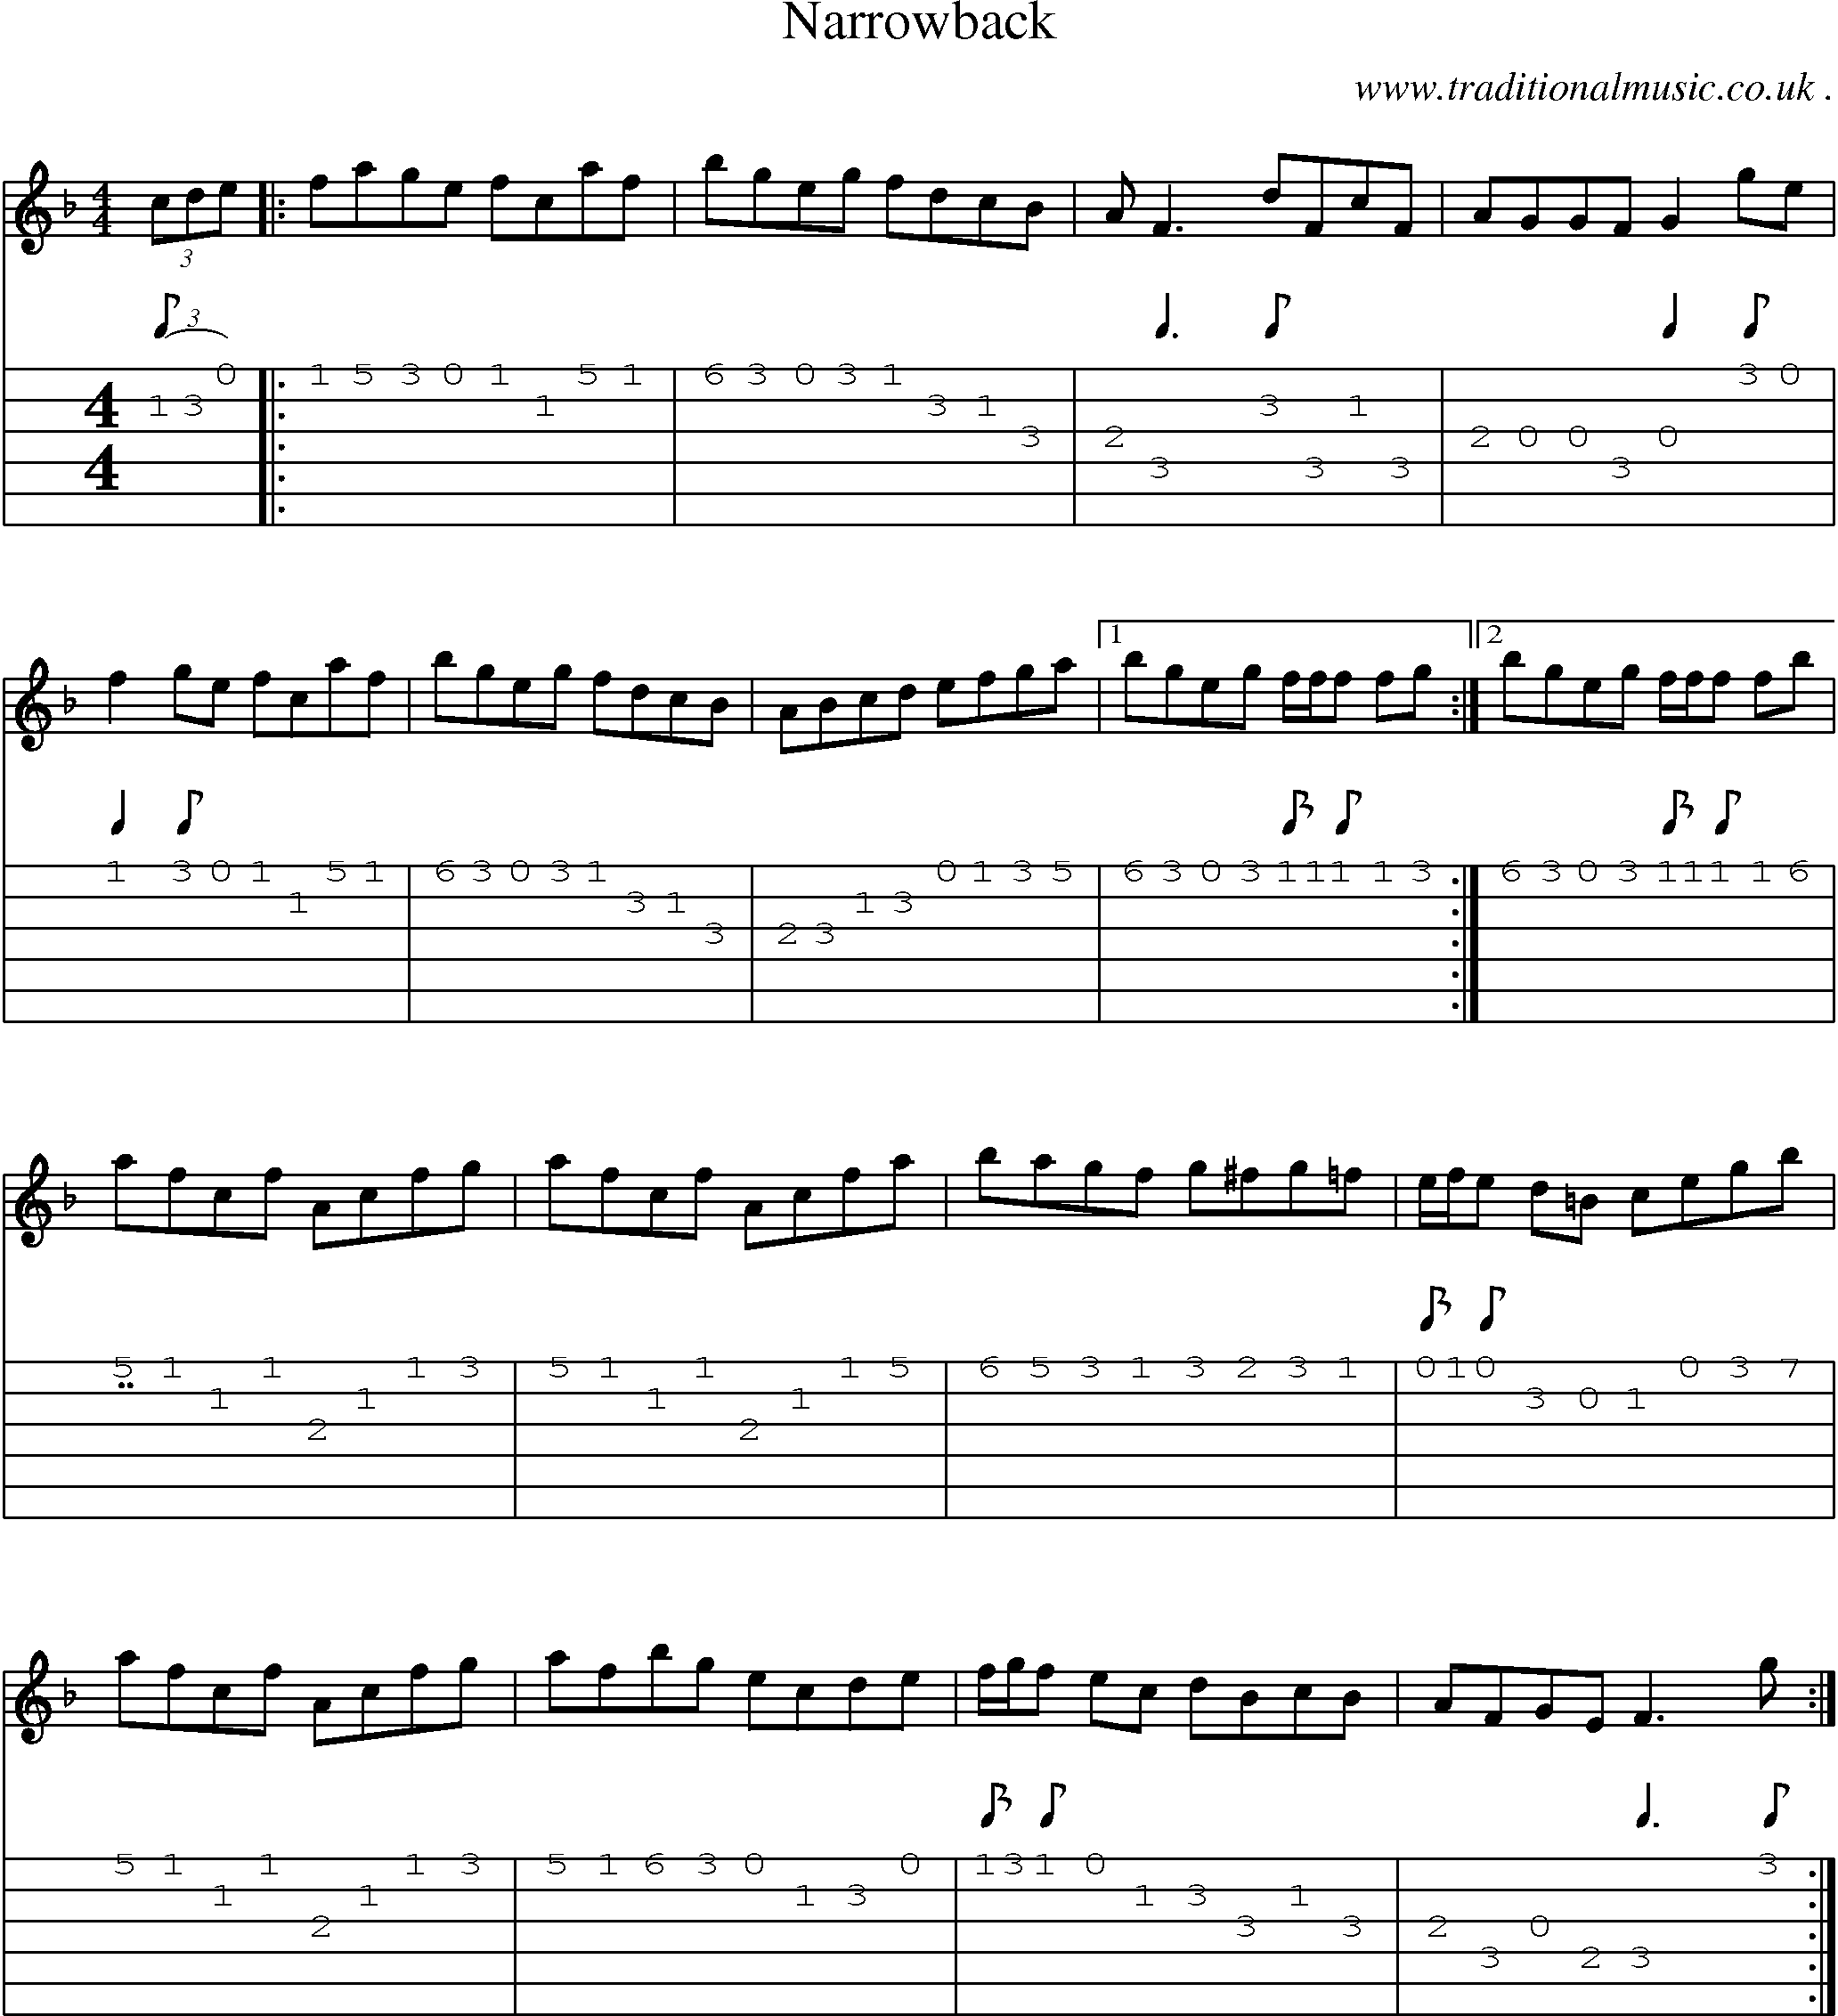 Sheet-Music and Guitar Tabs for Narrowback